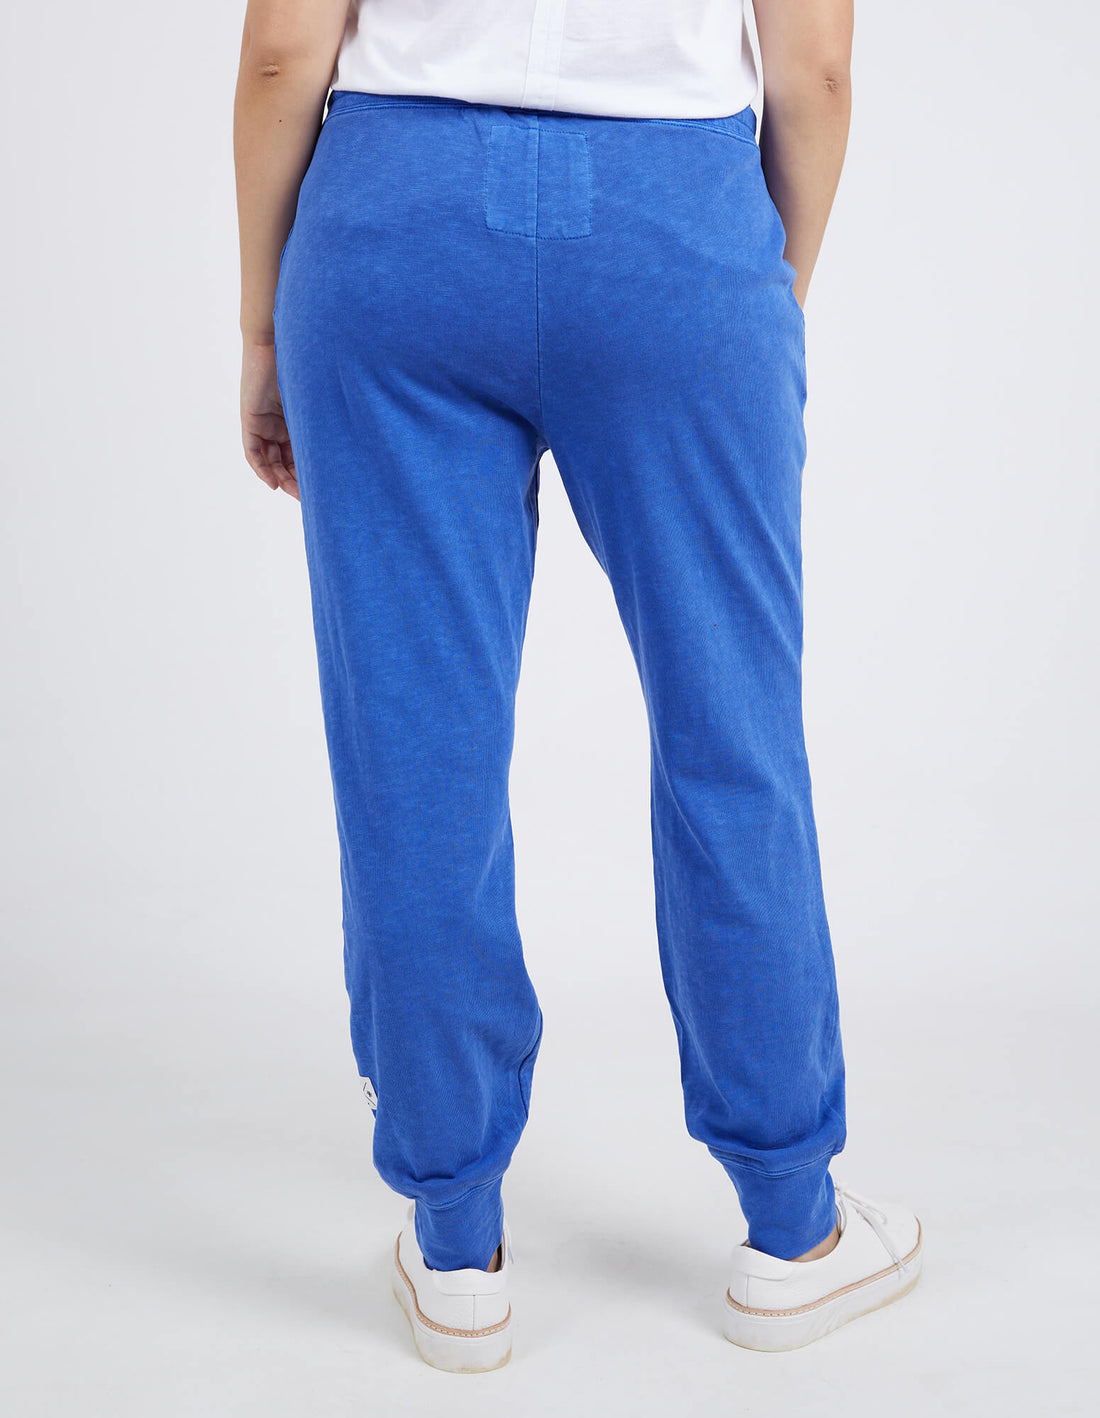 Out & About Pant - Royal Blue